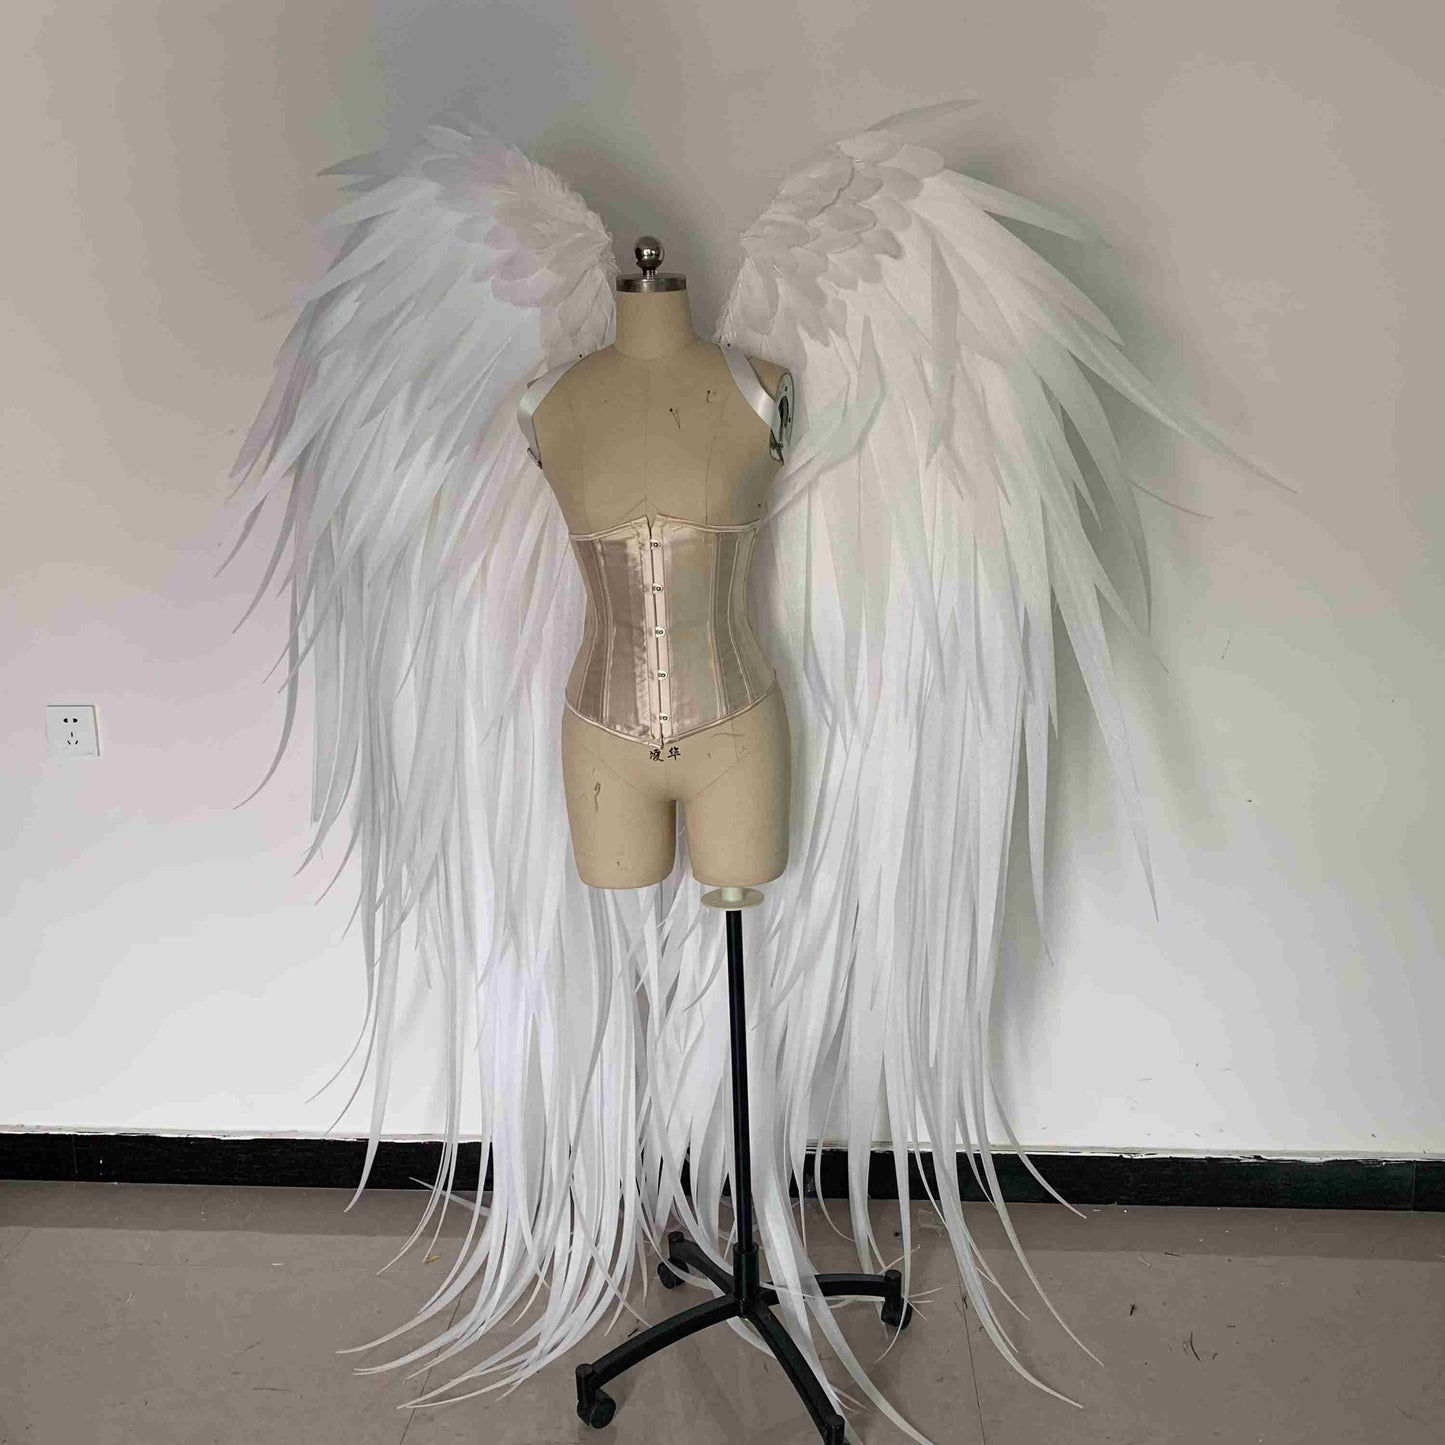 Our white angel wings from the front. Made from pearl cotton foam and some goose feathers. Wings for angel costume. Suitable for photoshoots.